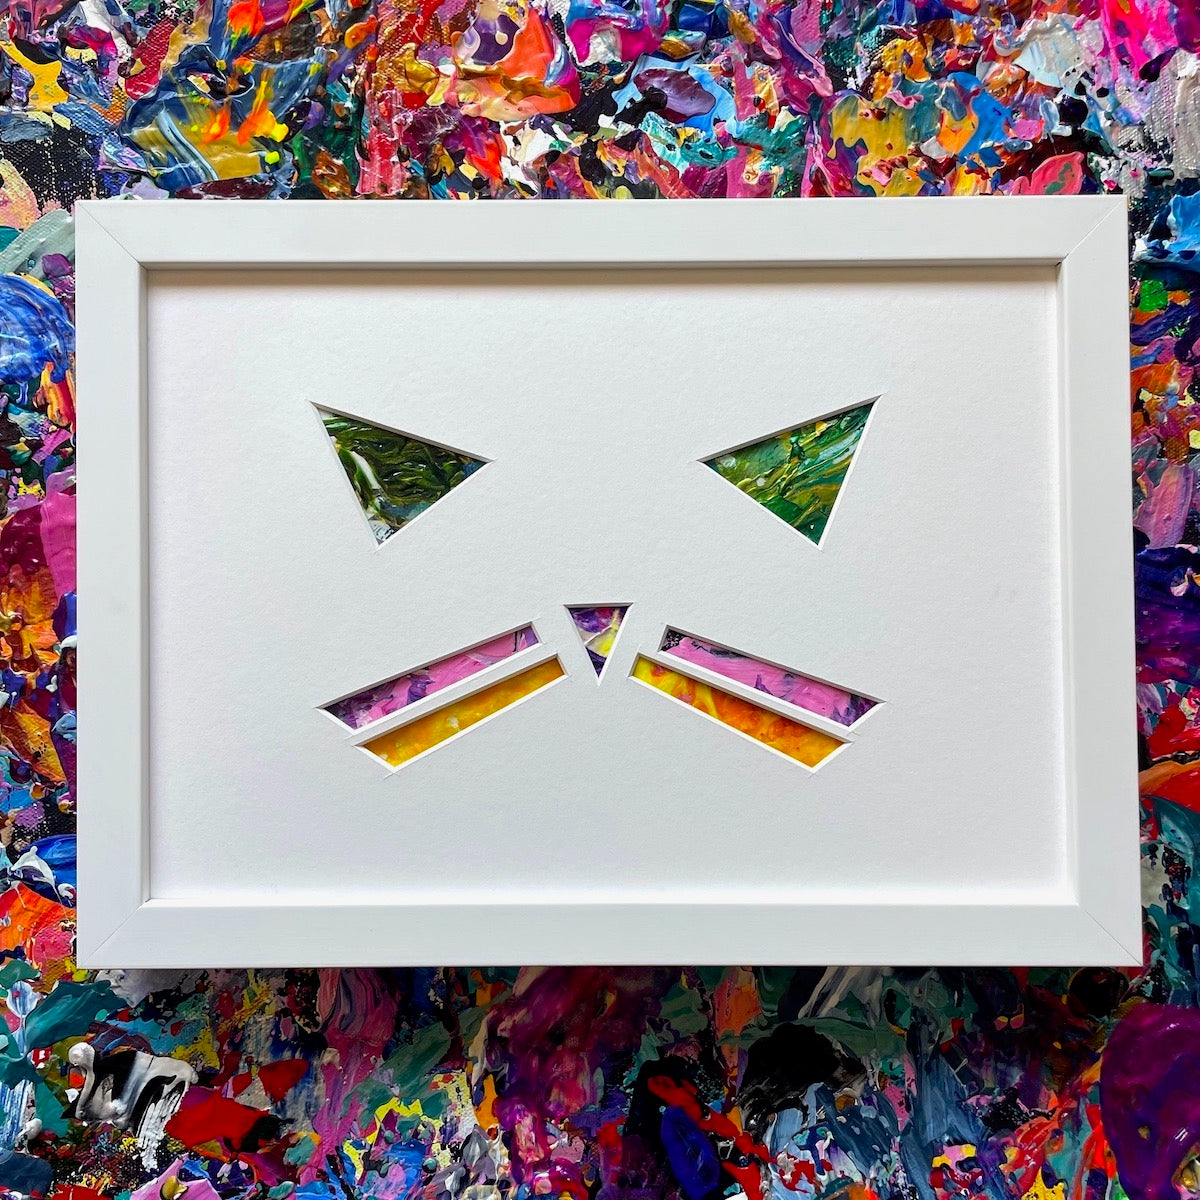 Cool cat art for cat lovers